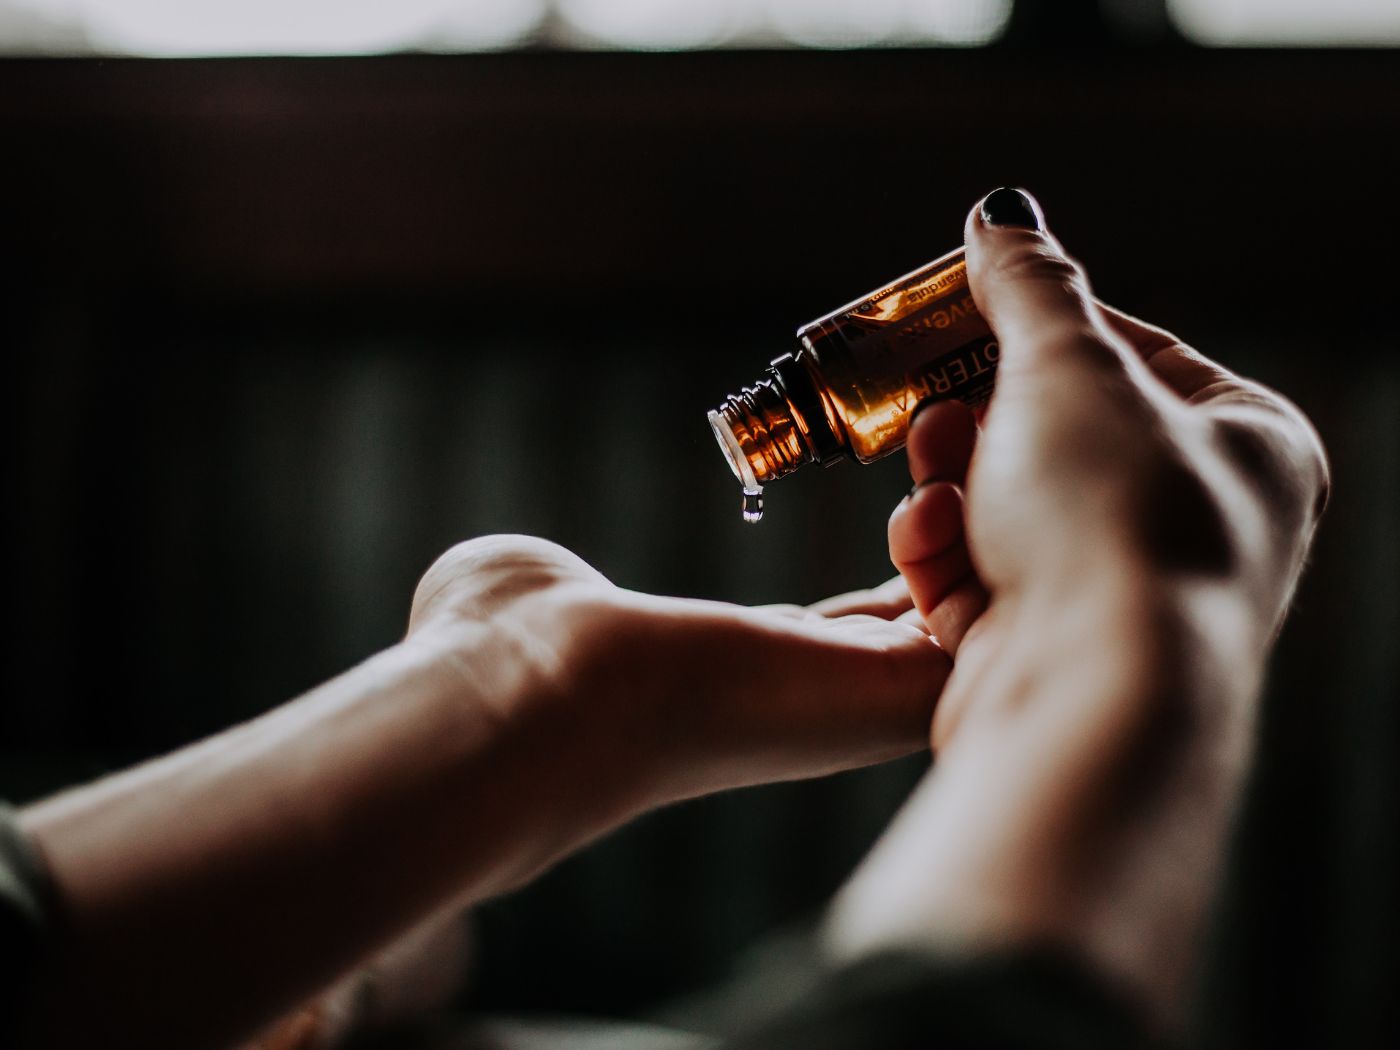 One Hand Dripping An Essential Oil From a Bottle Into The Other Hand